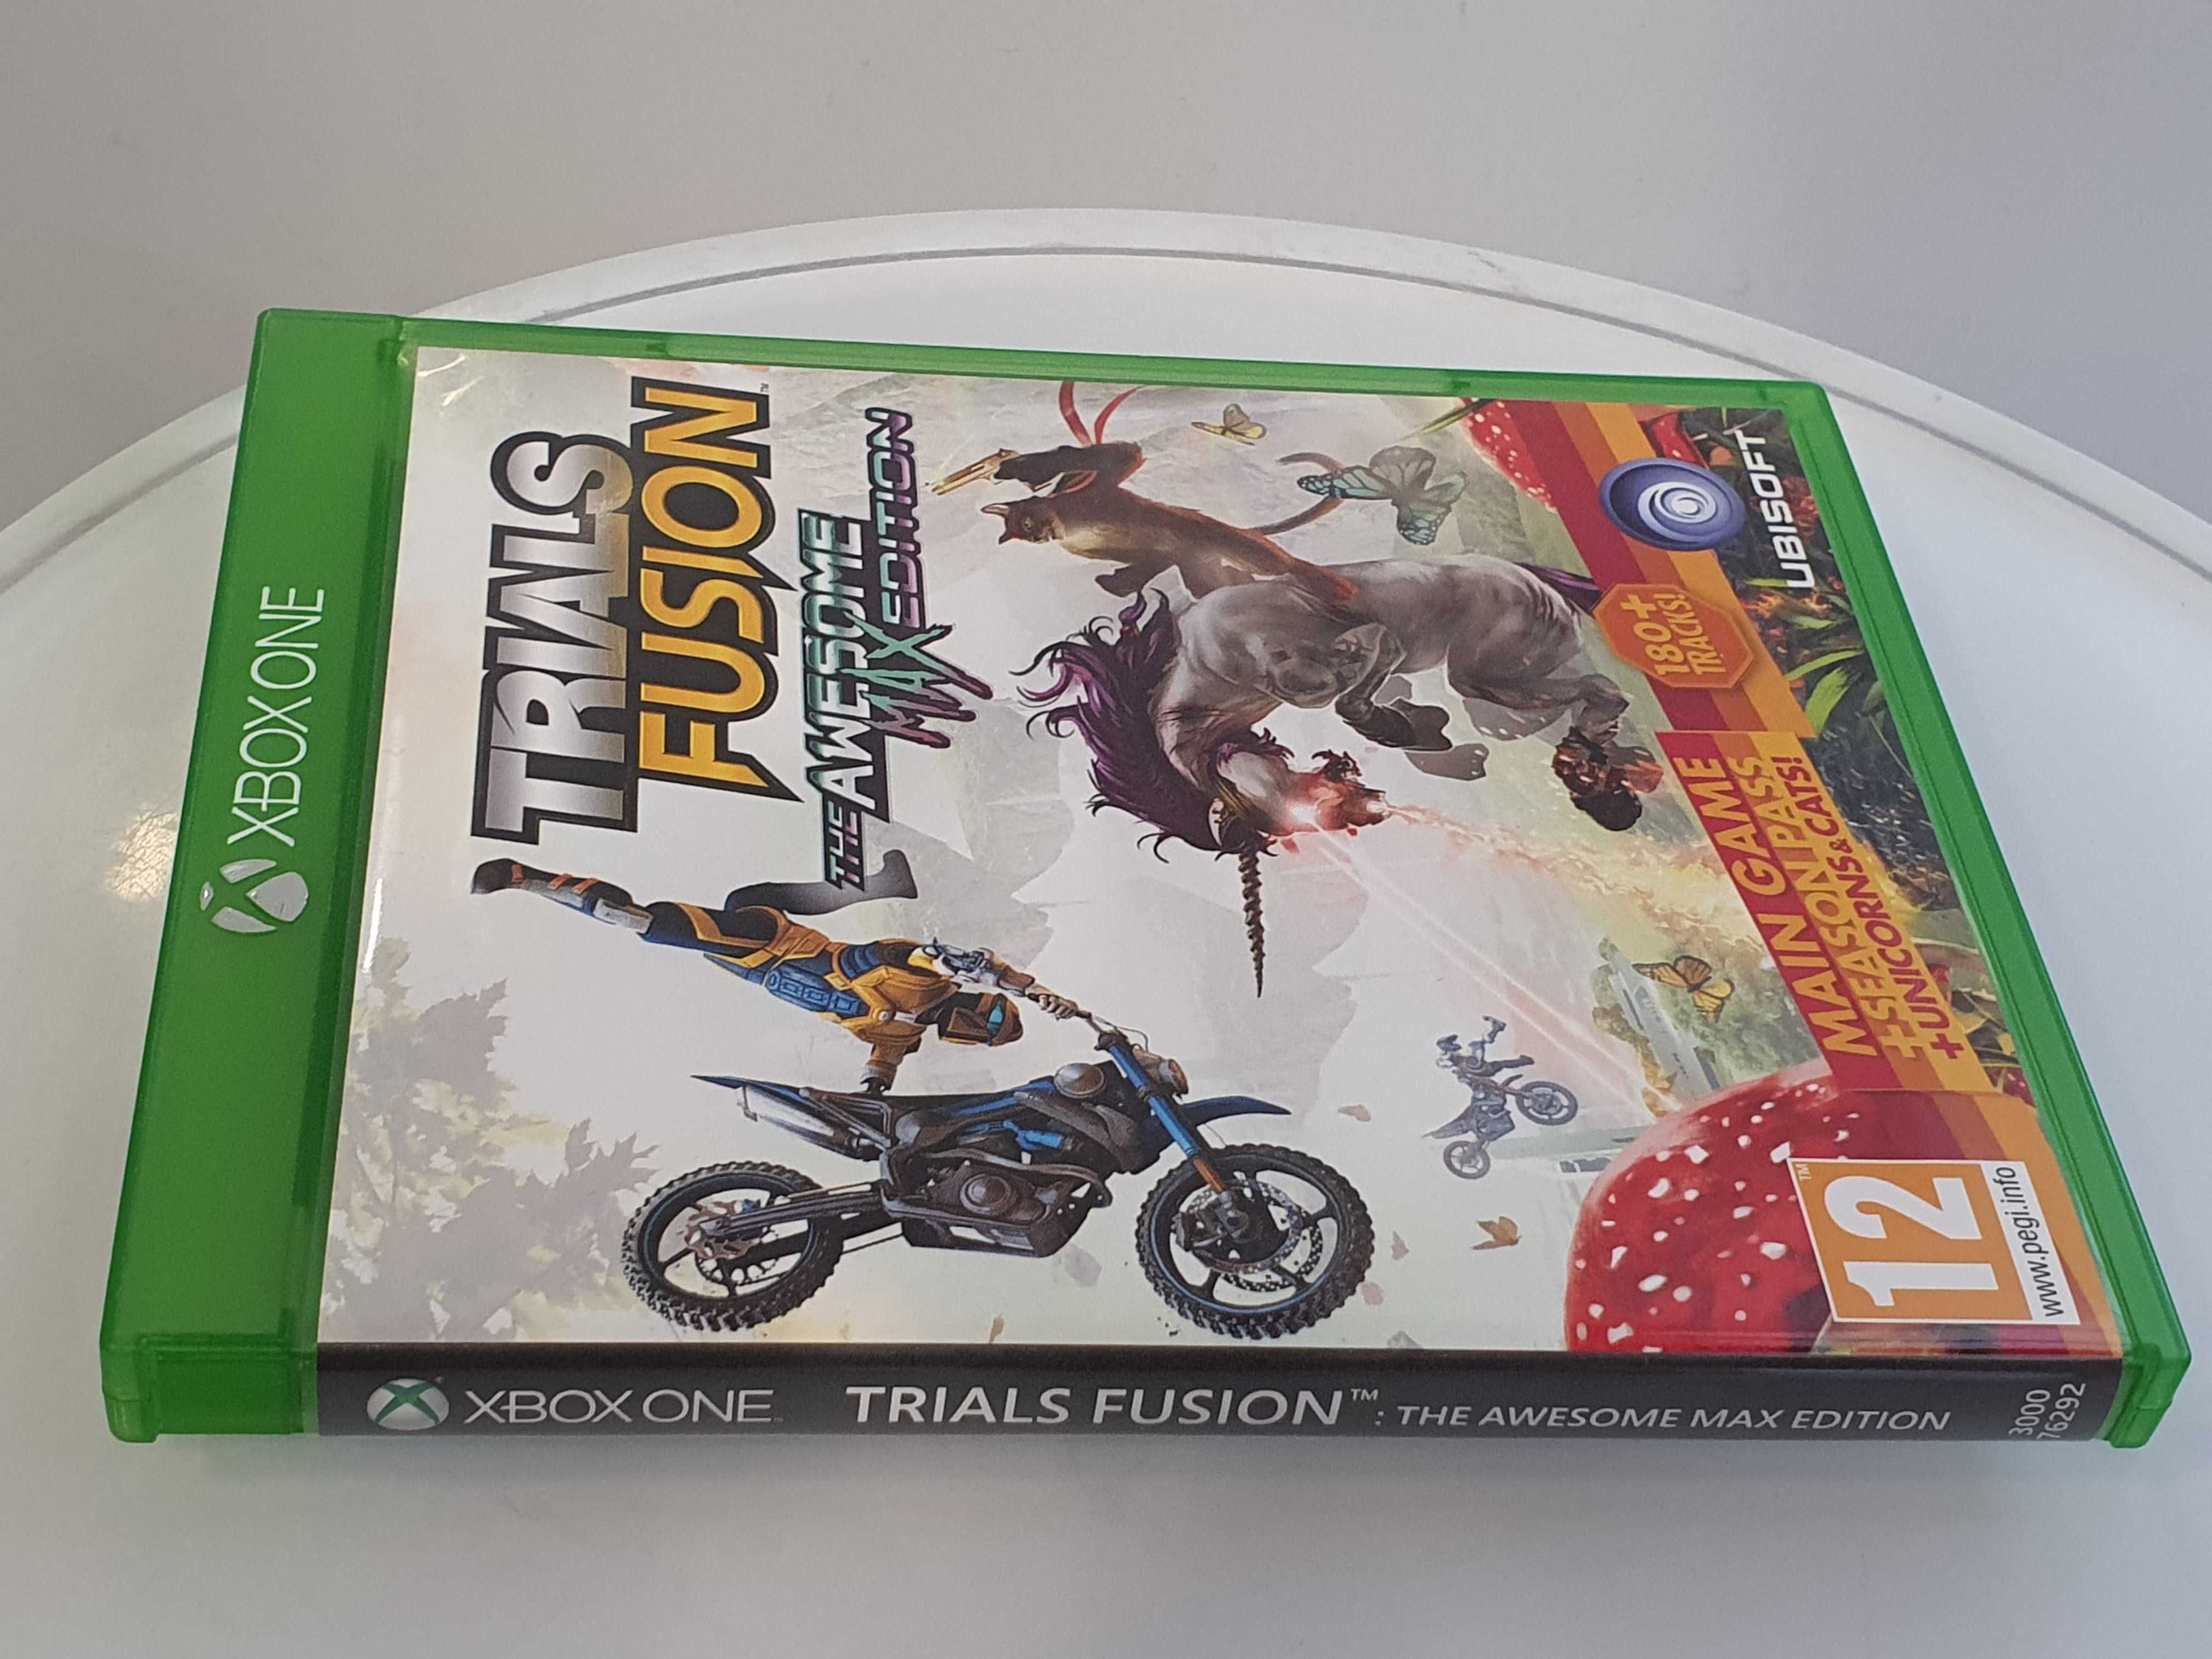 Trials Fursion XBOX The Awesome MAX Edition